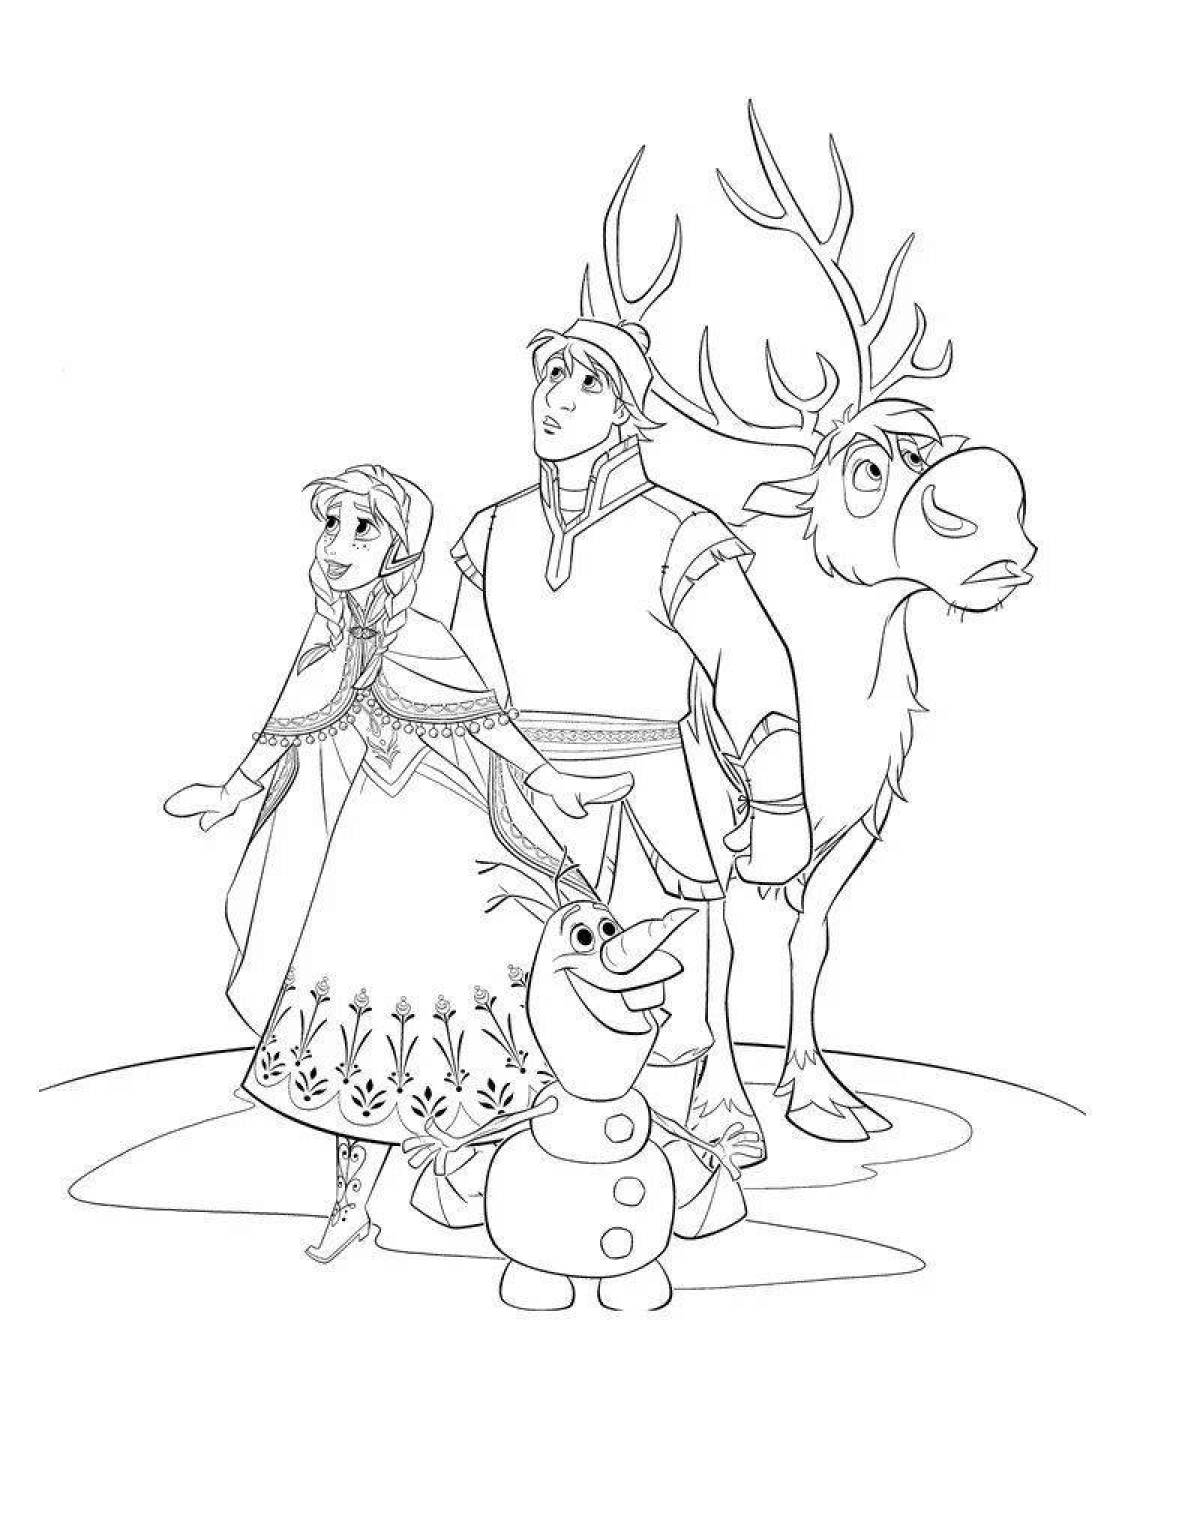 Glowing anna and olaf coloring page